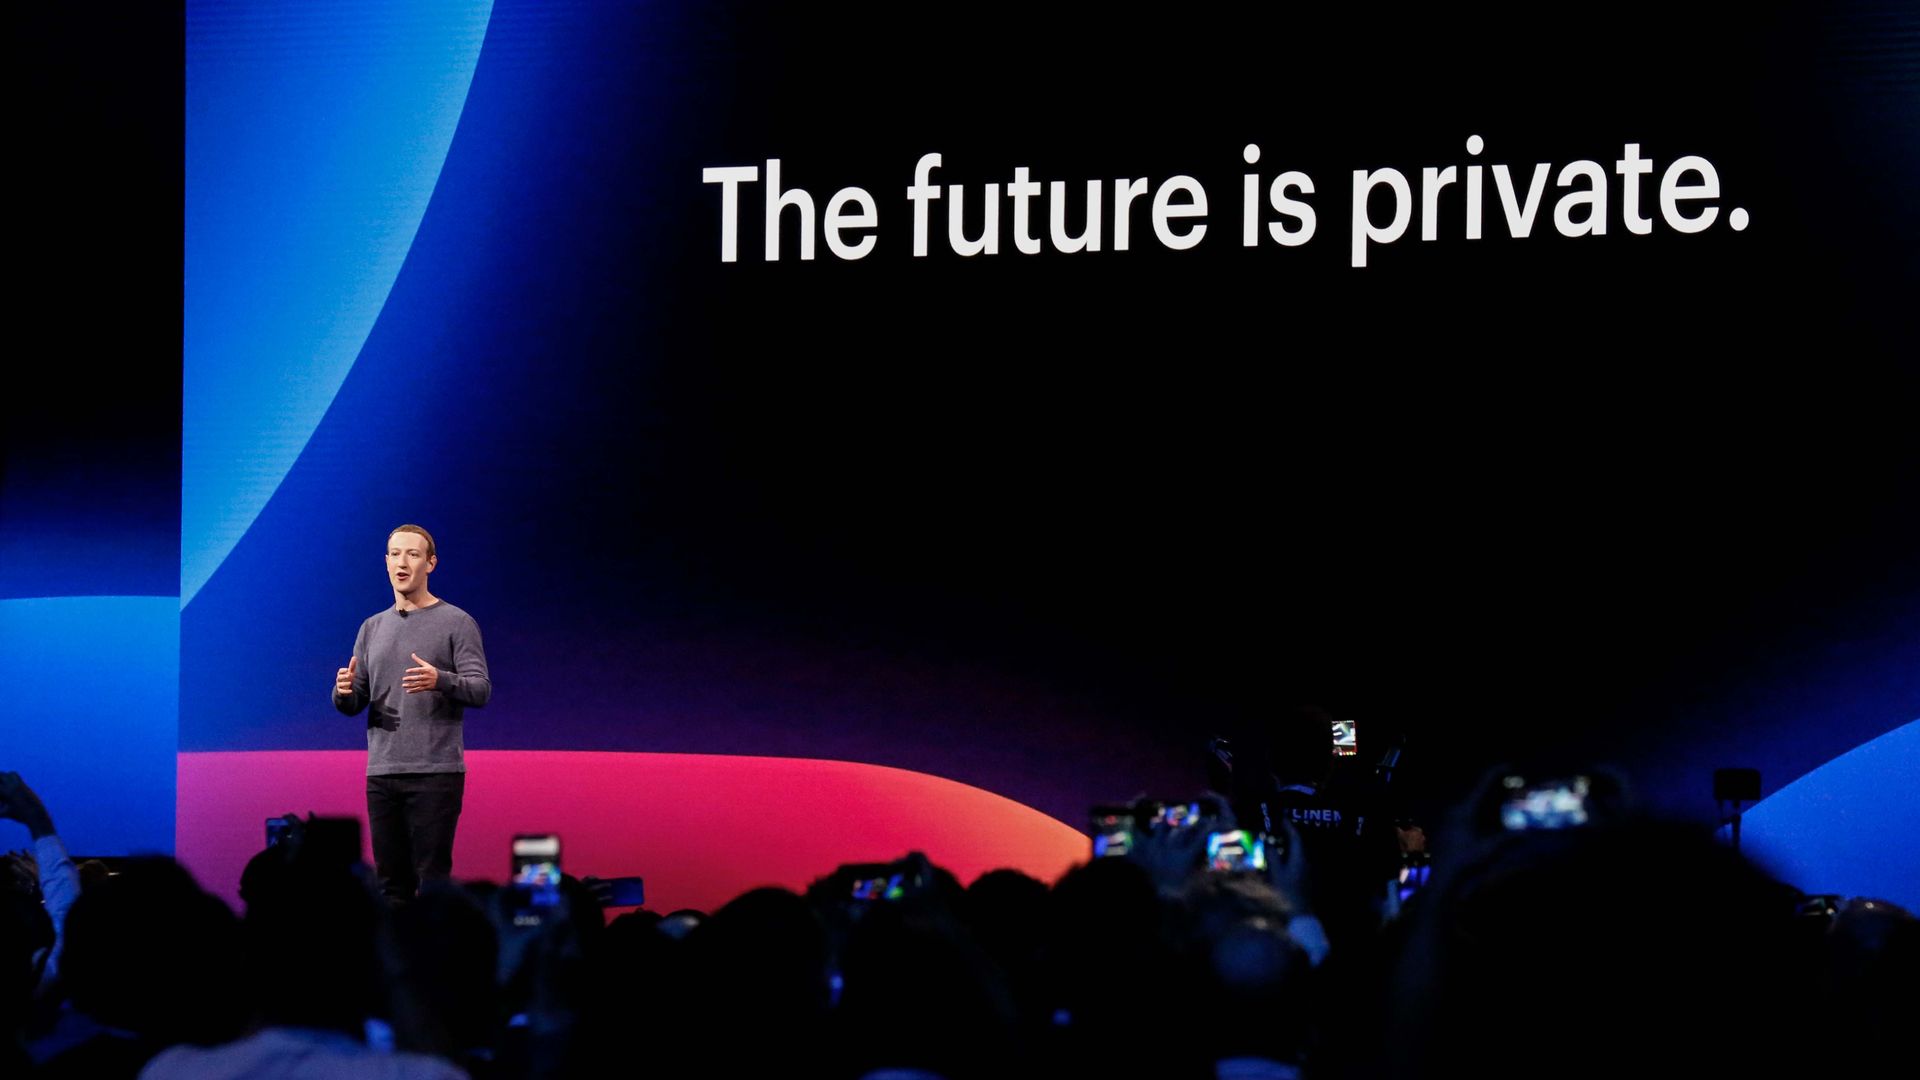 Photo of Mark Zuckerberg standing before crowd with slide reading "The future is private"